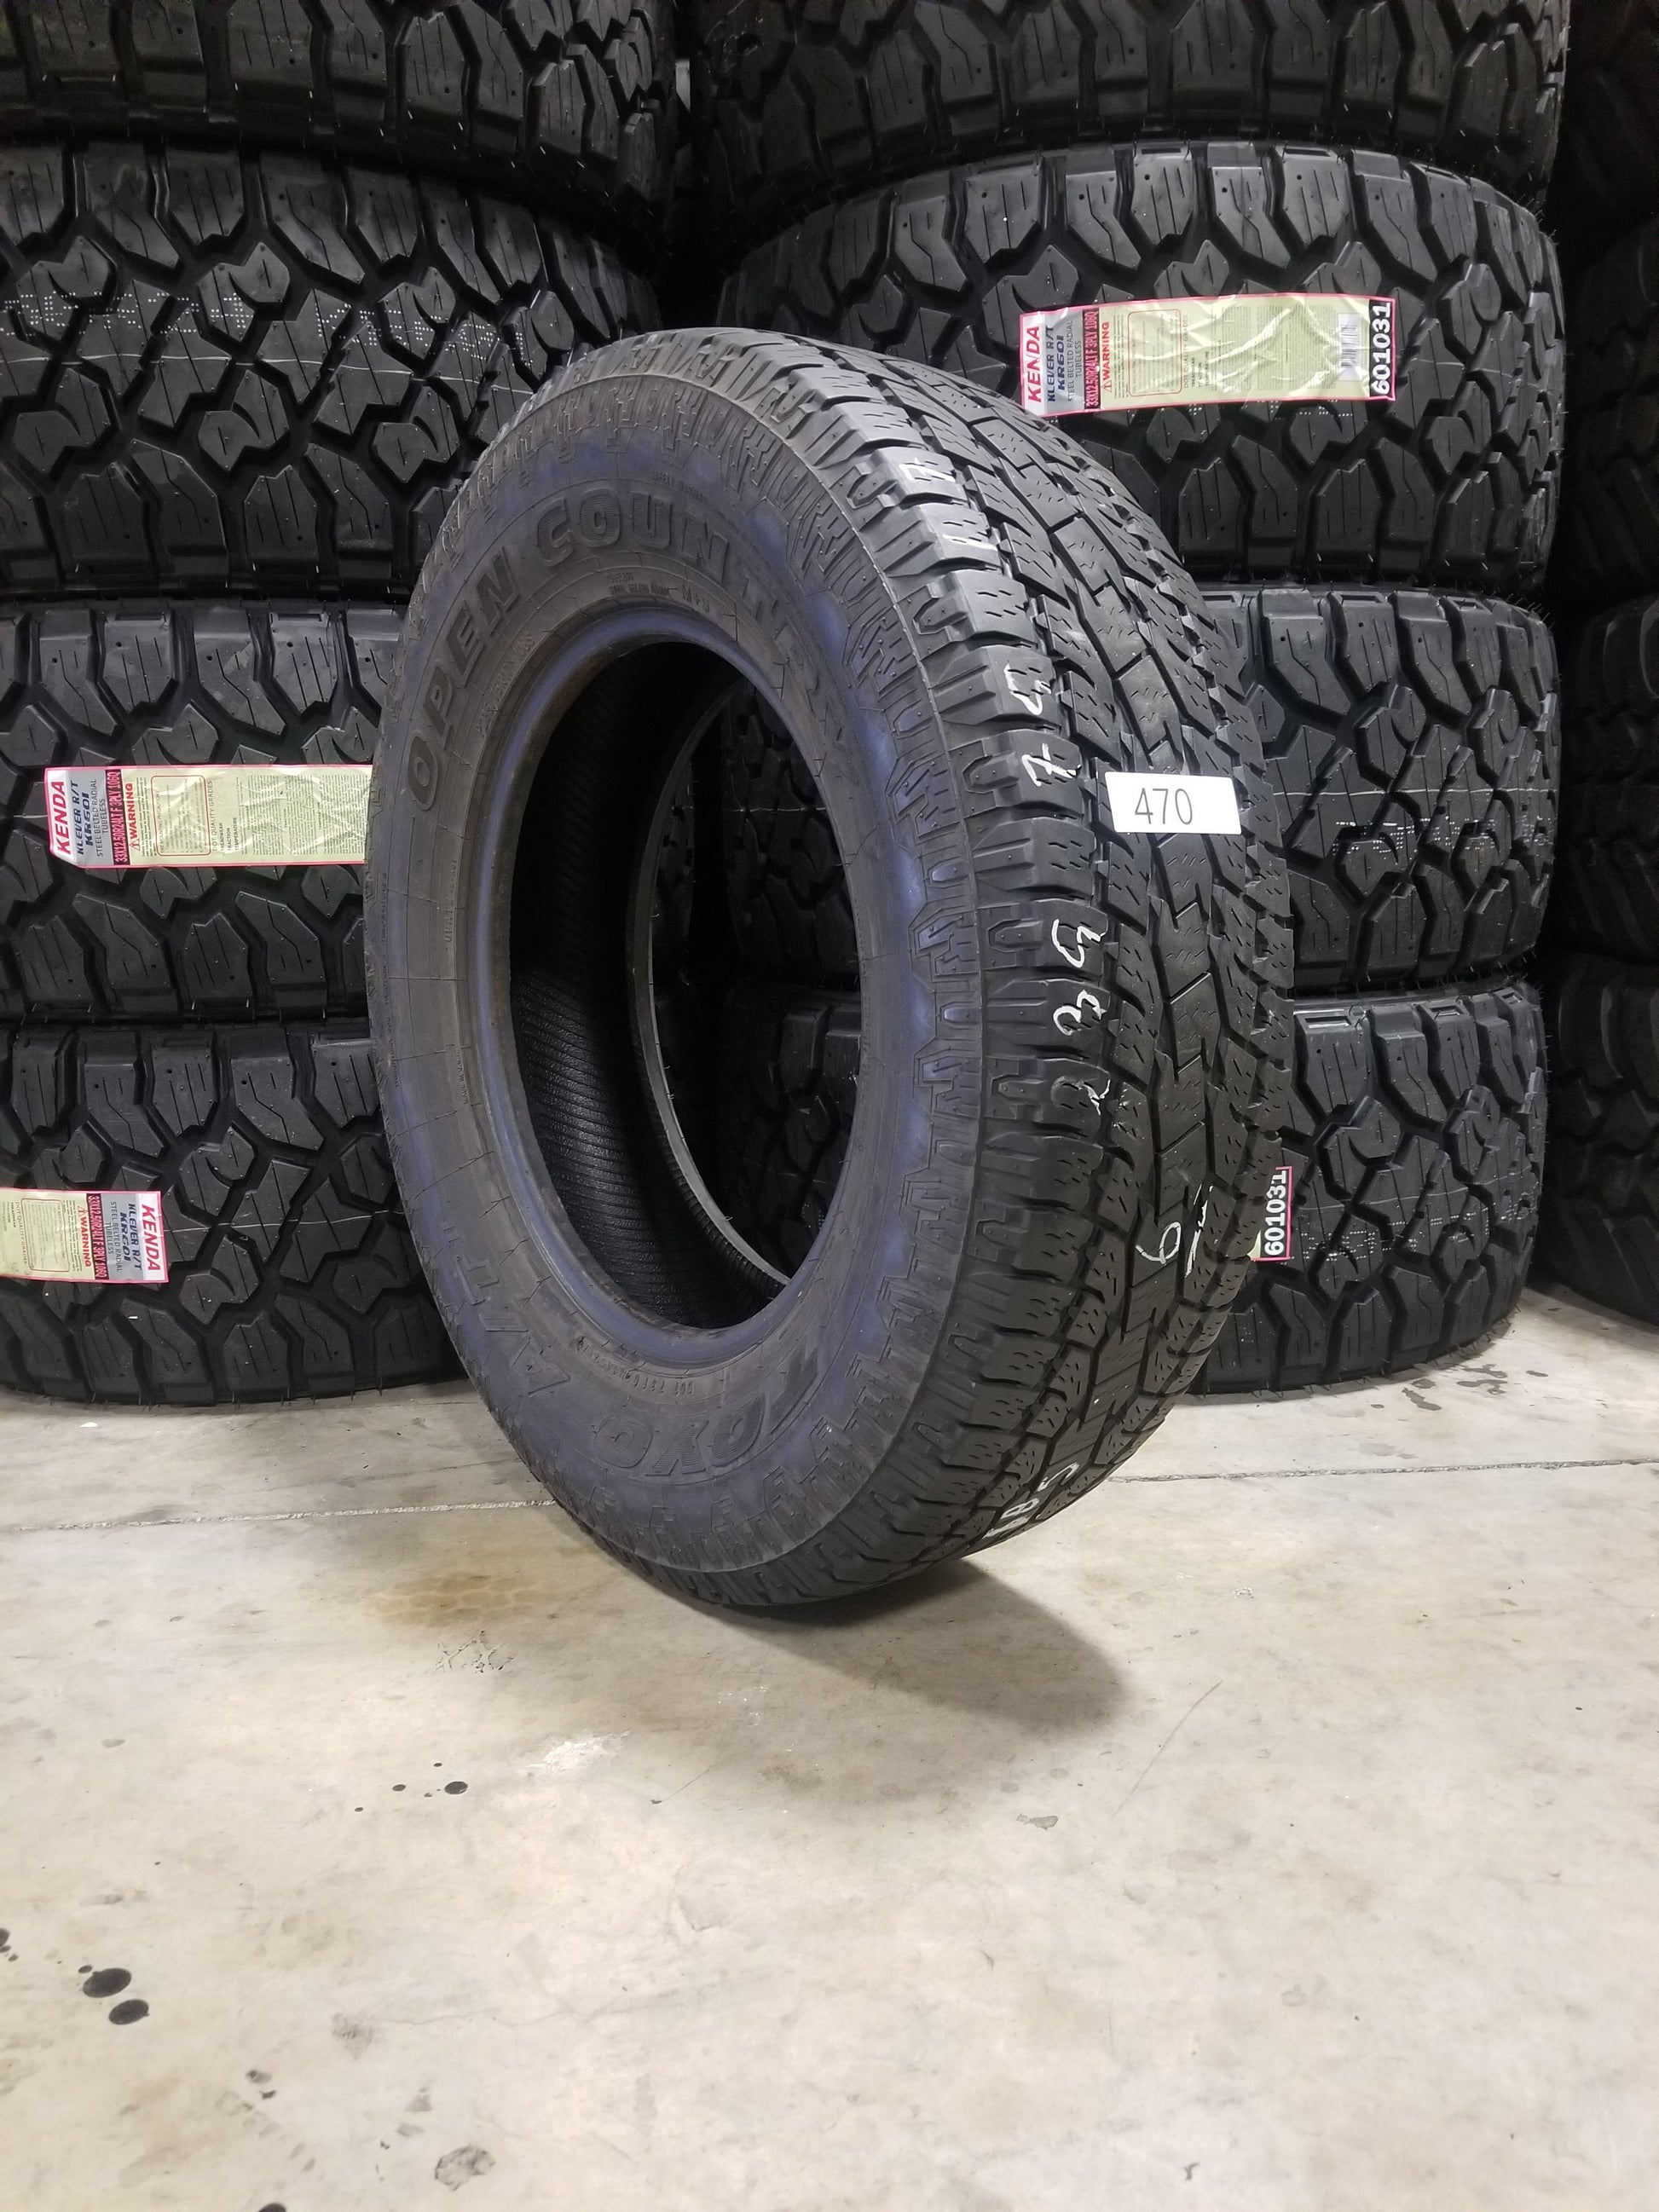 SINGLE 235/75R17 Toyo Open Country A/T 108 S SL - Used Tires